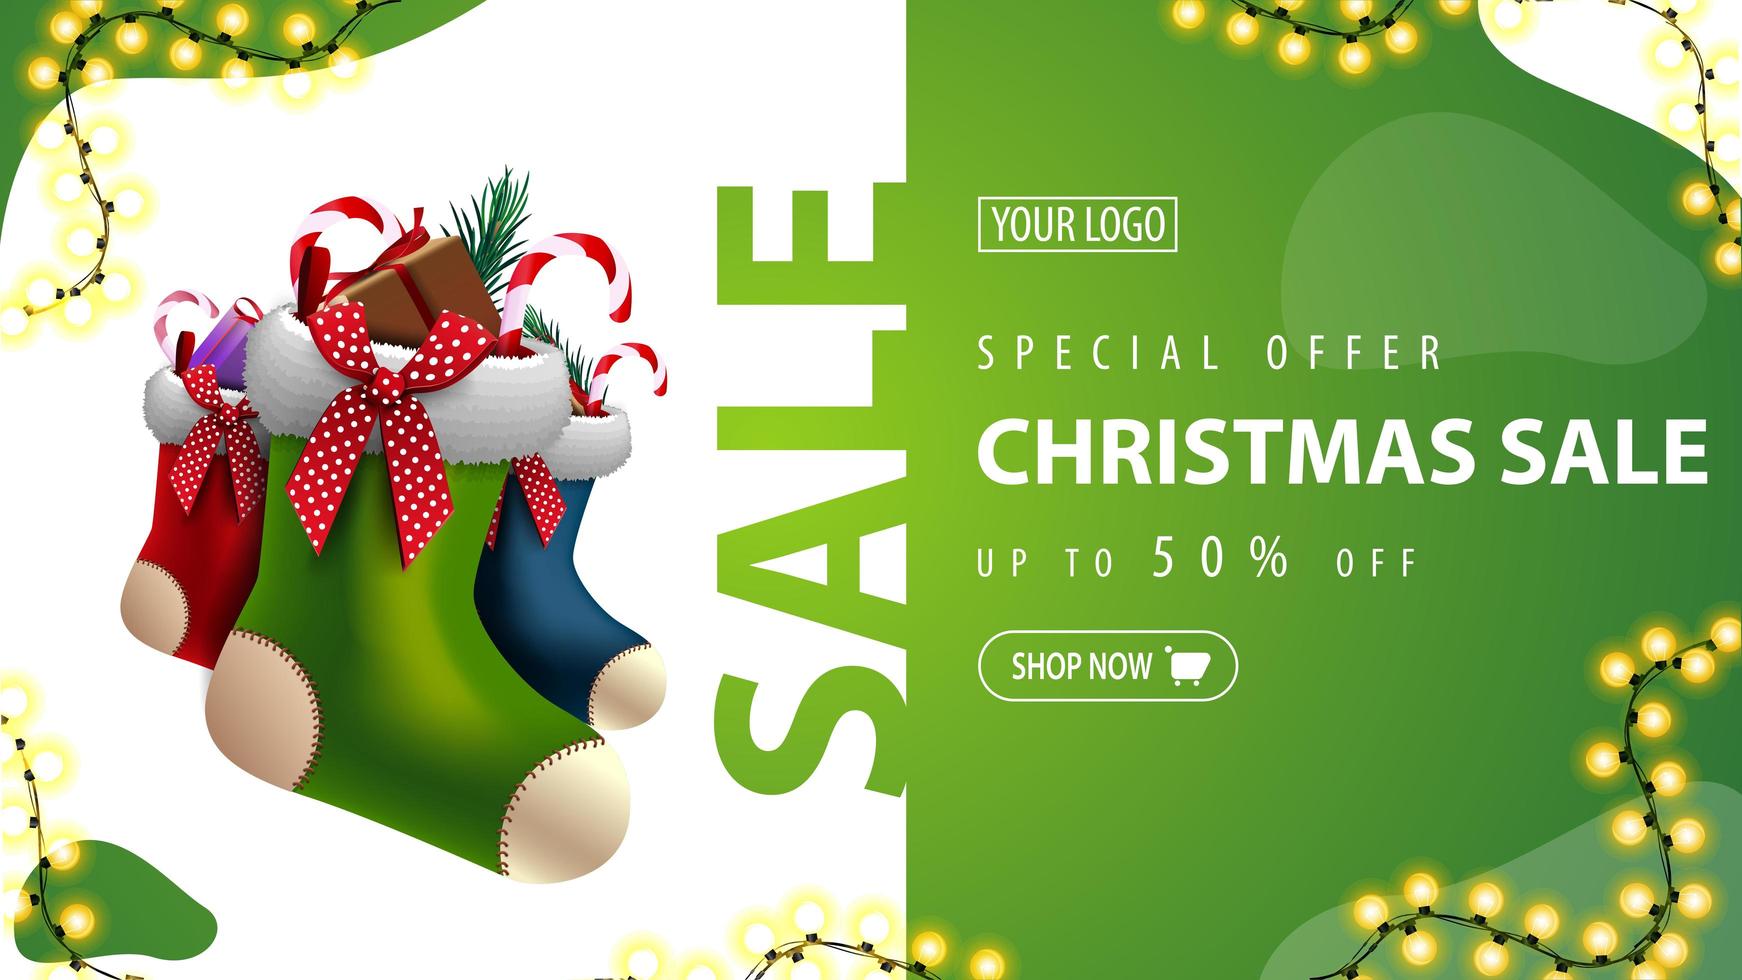 Special offer, Christmas sale, up to 50 off, green discount banner with Christmas stockings and garland vector